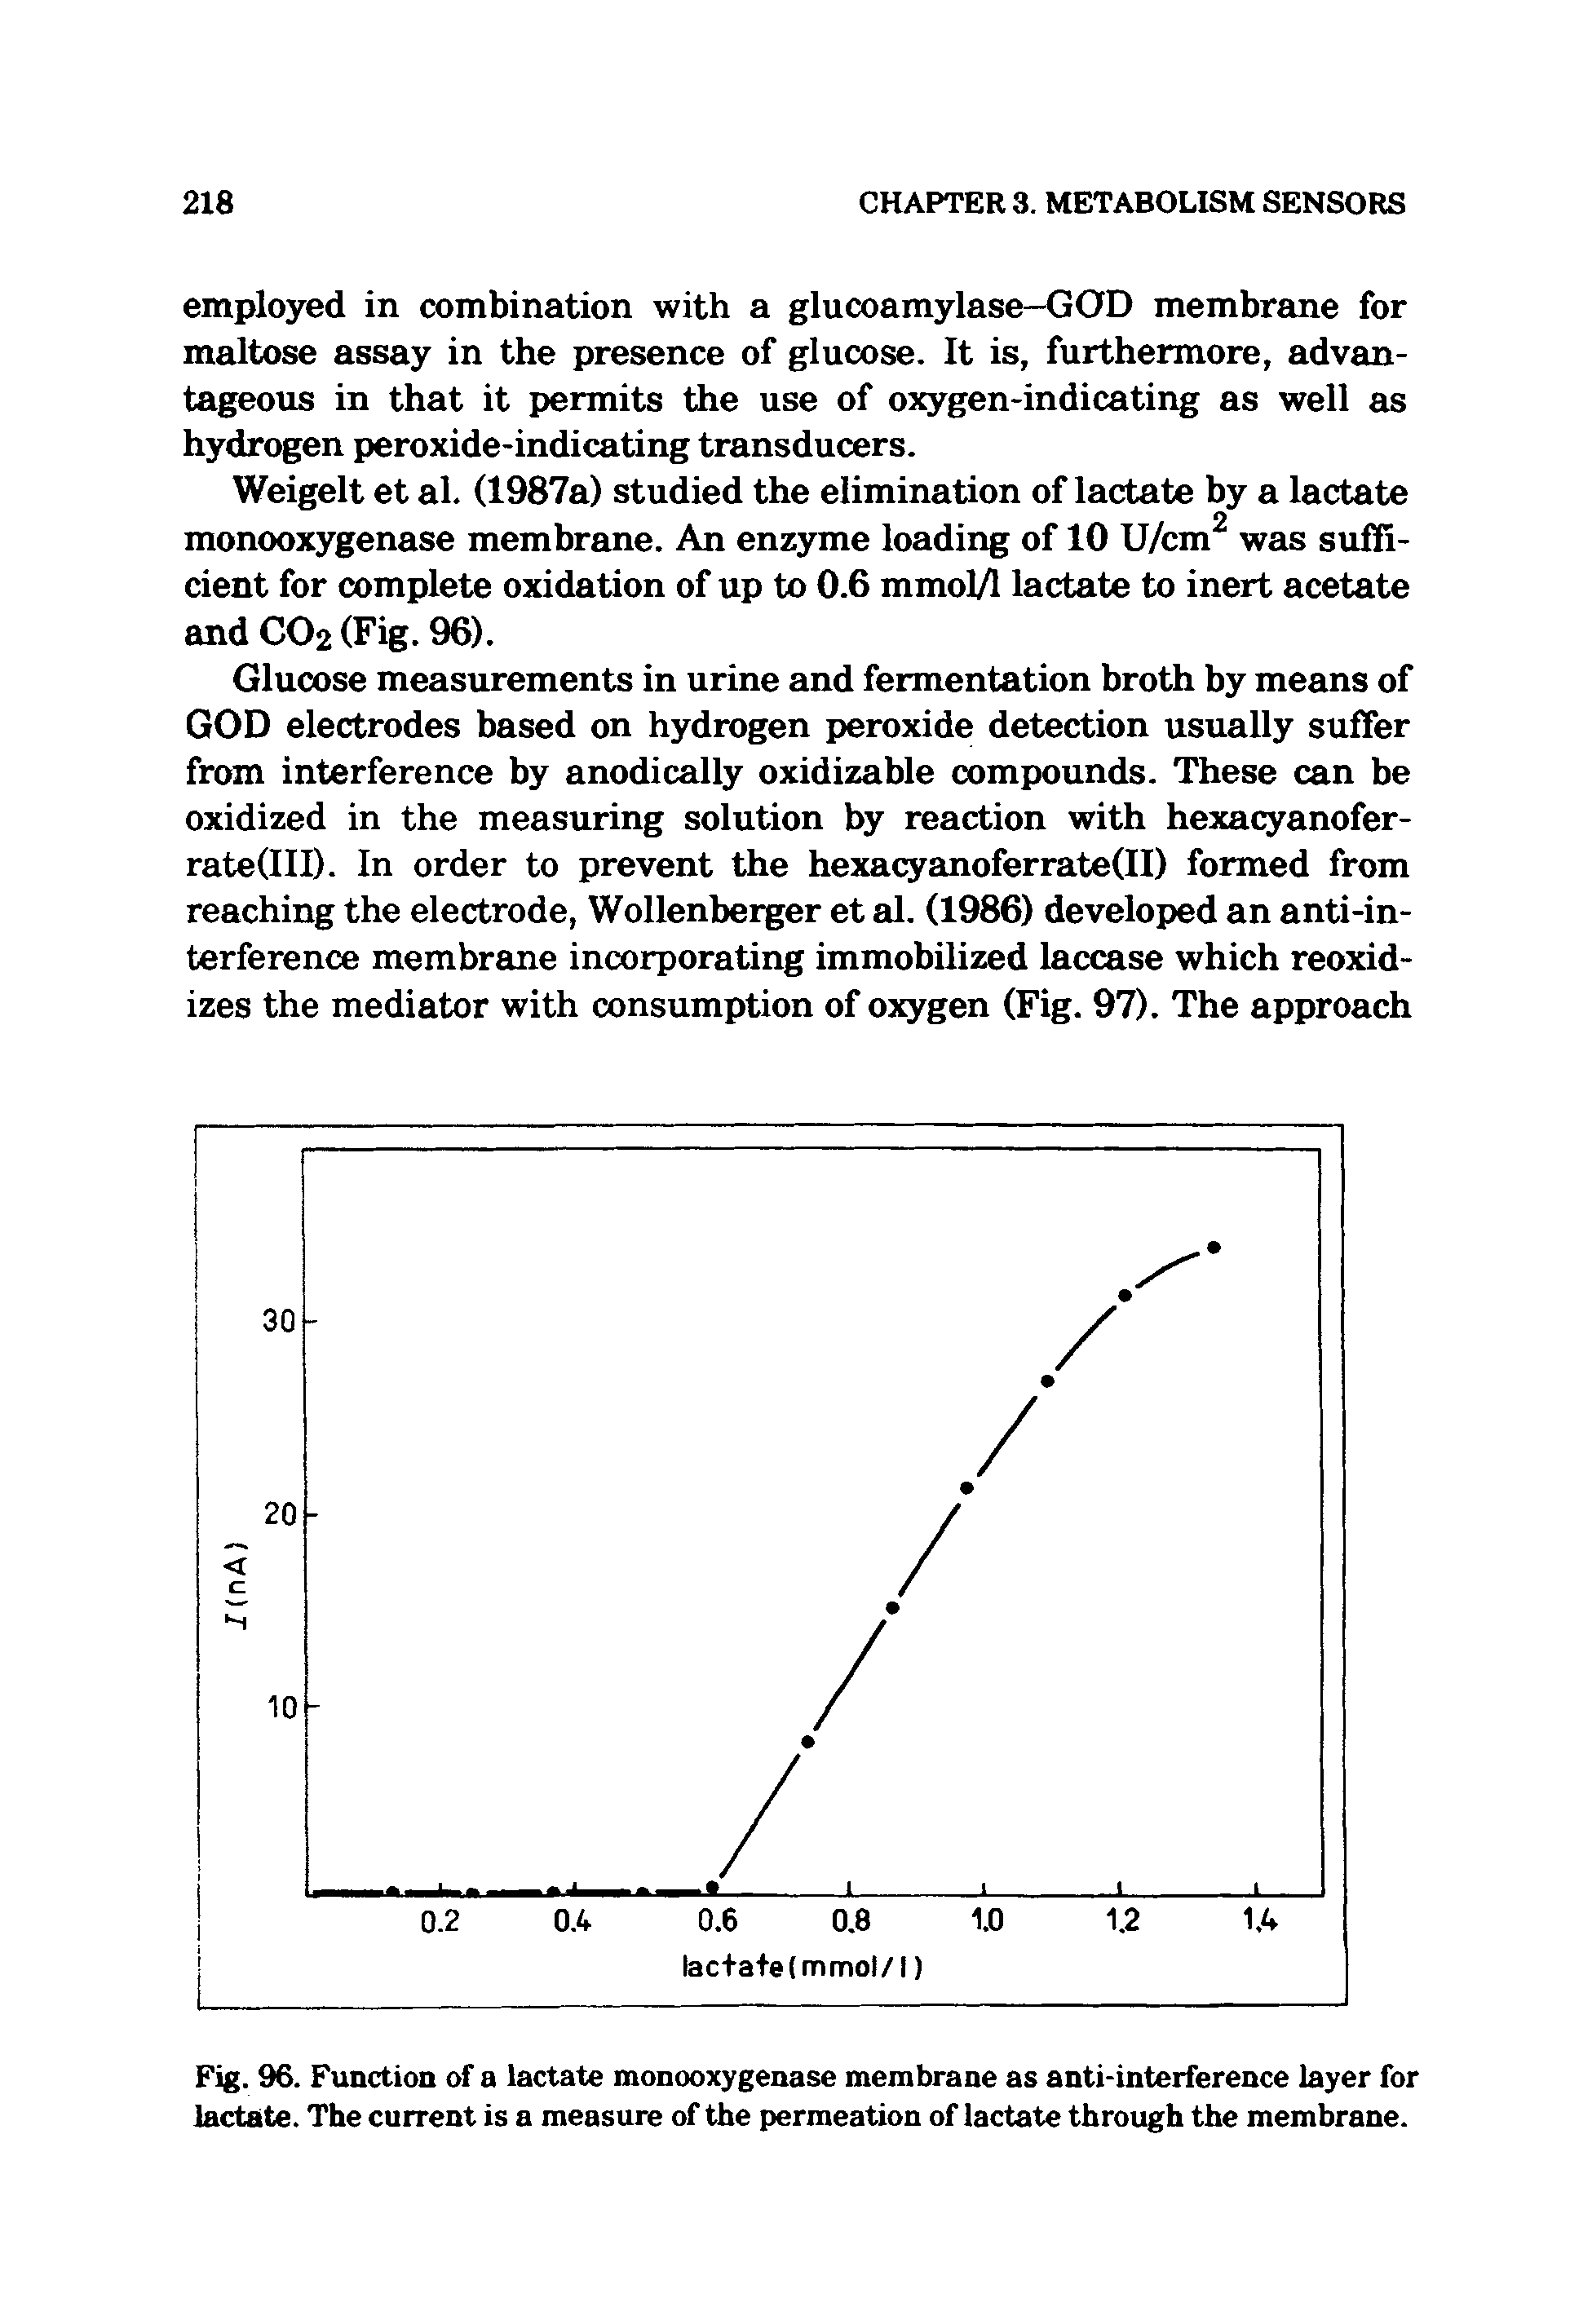 Fig. 96. Function of a lactate monooxygenase membrane as anti-interference layer for lactate. The current is a measure of the permeation of lactate through the membrane.